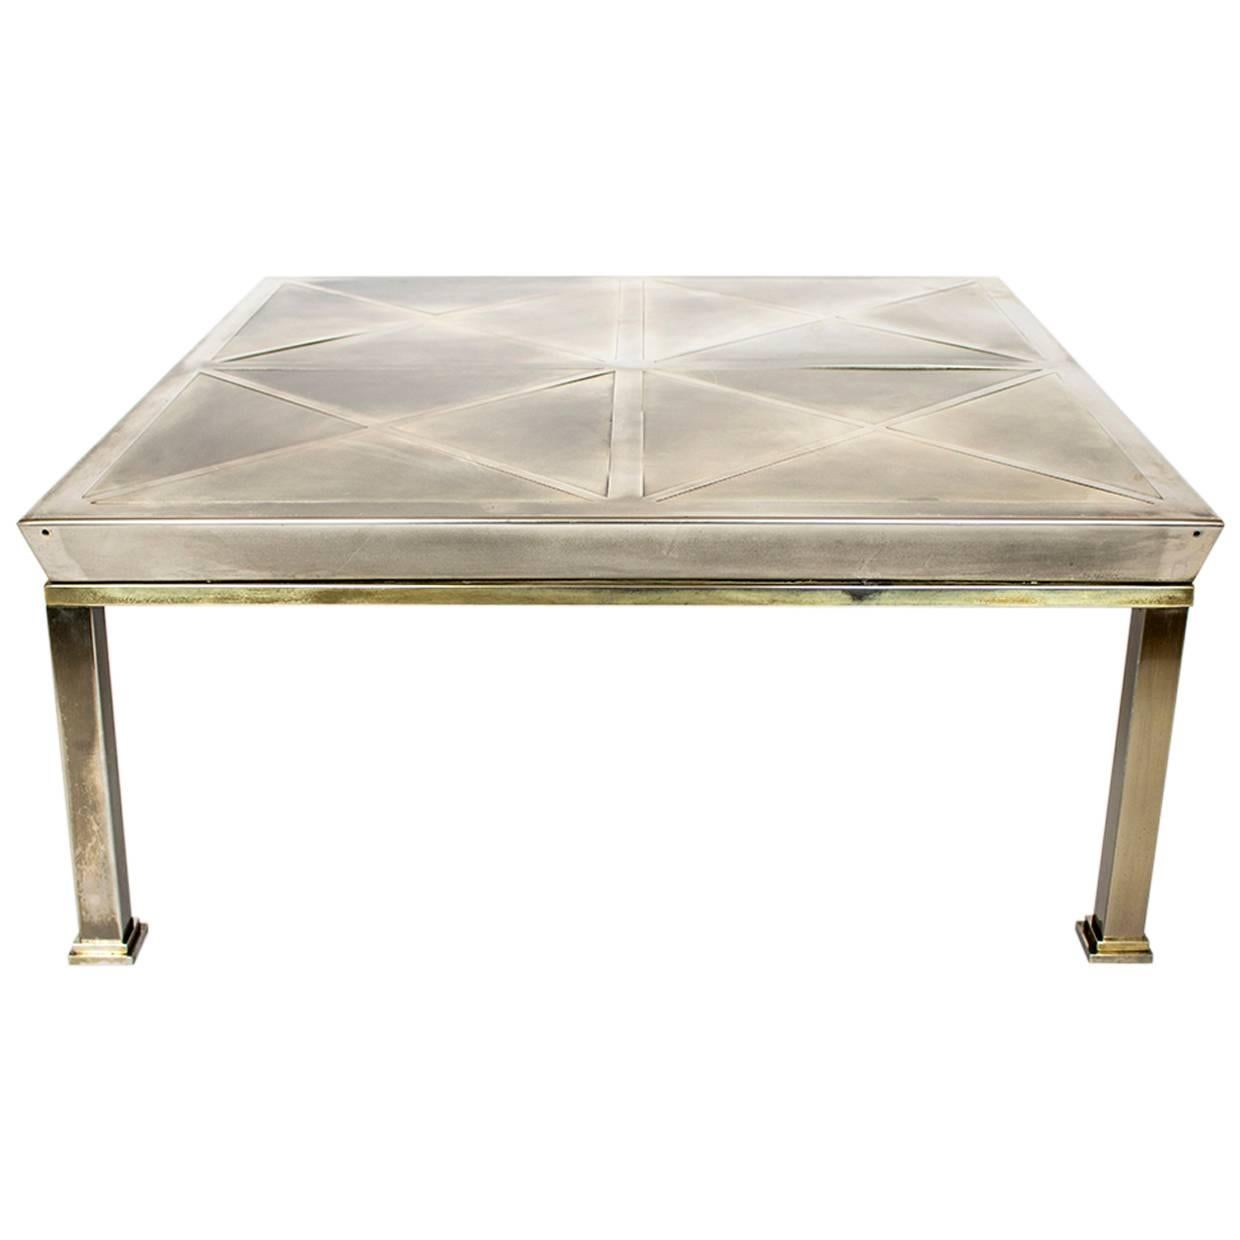 Mid-Century Modern Brushed Brass Coffee Table, Gabriella Crespi Geometric Style For Sale